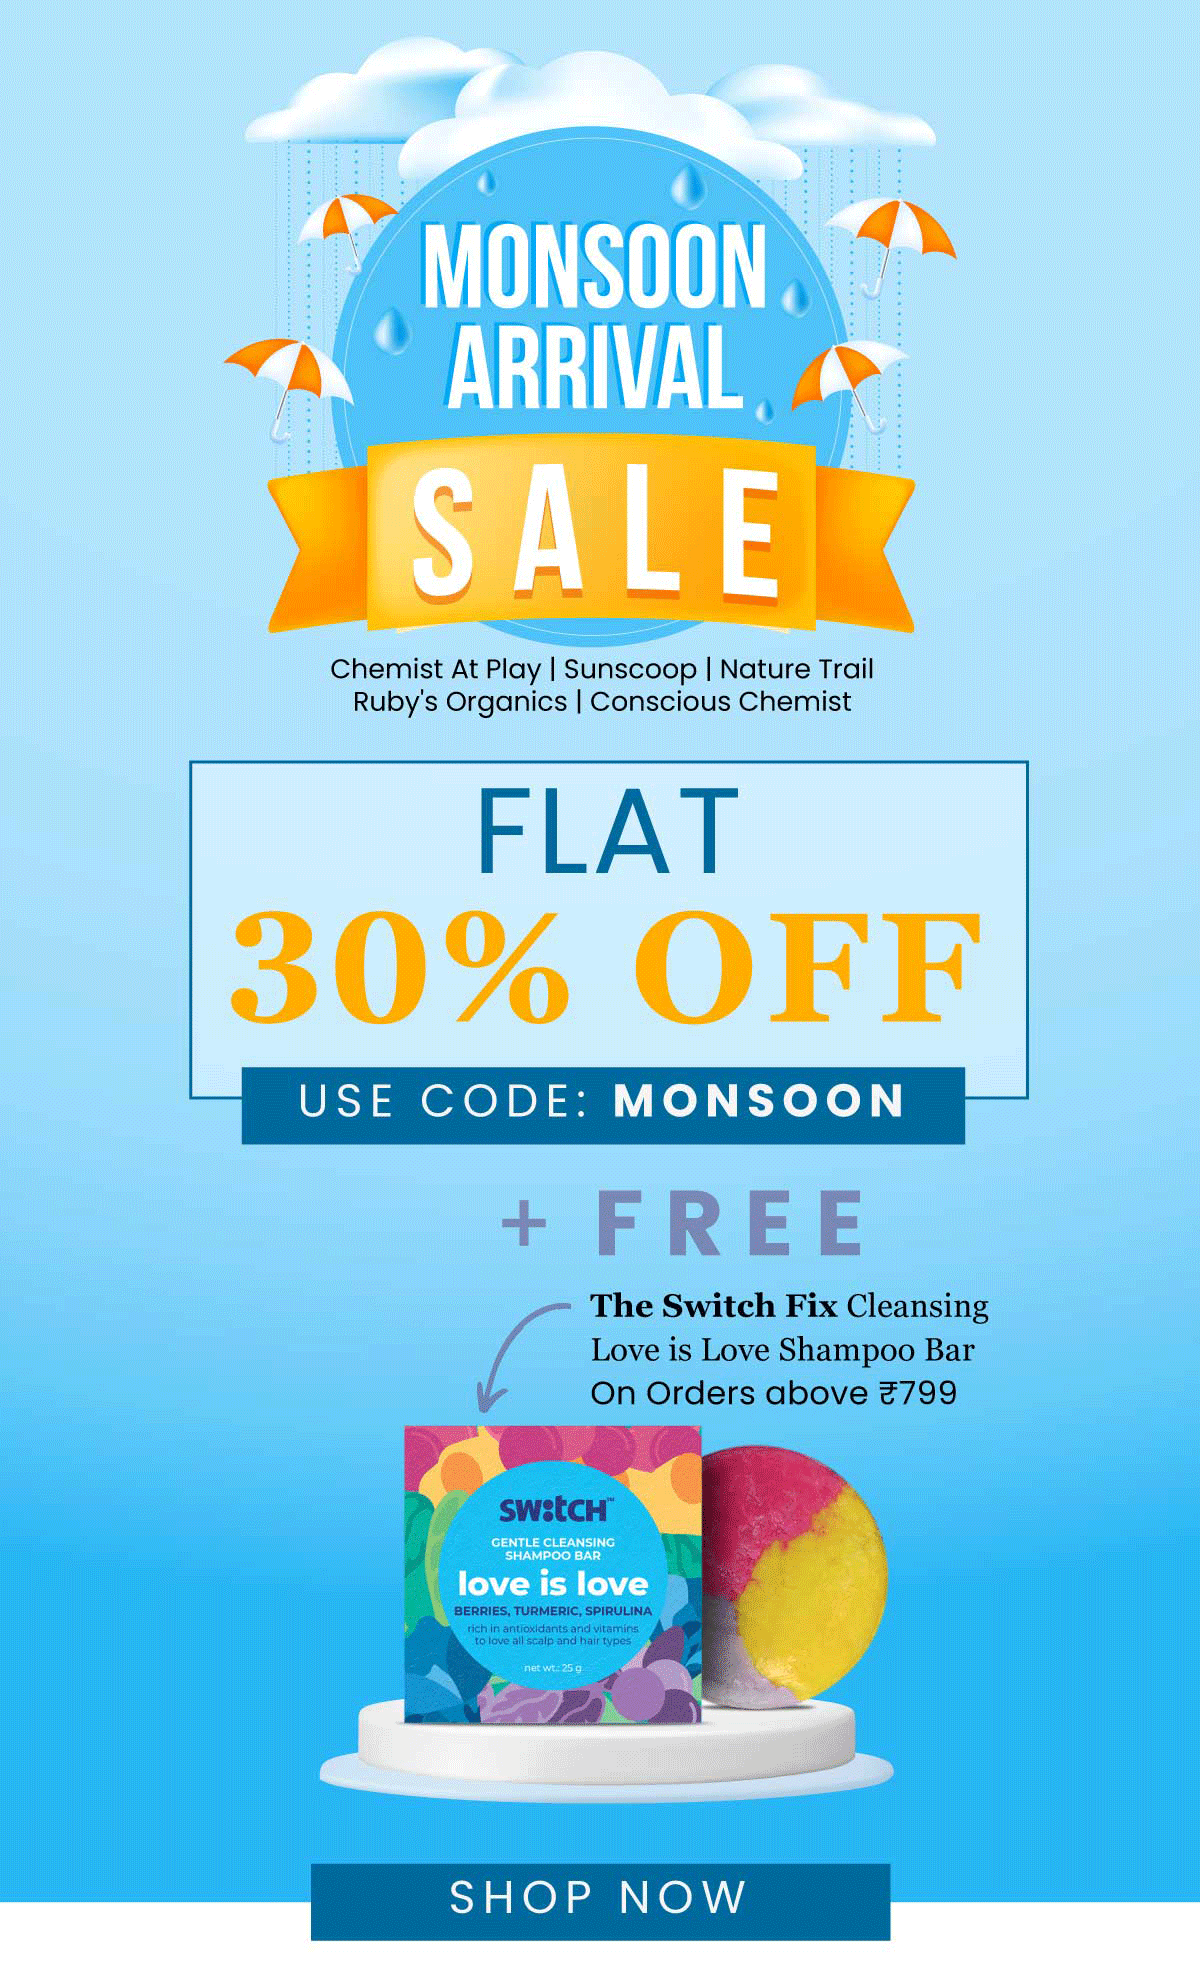  Chemist At Play Sunscoop Nature Trail Ruby's Organics Conscious Chemist FLAT 30% OFF USE CODE: MONSOON FREE The Switch Fix Cleansing - Love is Love Shampoo Bar On Orders above 799 SWetCH IES, TURMERIC, SPIRULINA vitamins i antioxidants and vits tolove all scalp and hair types SHOP NOW 